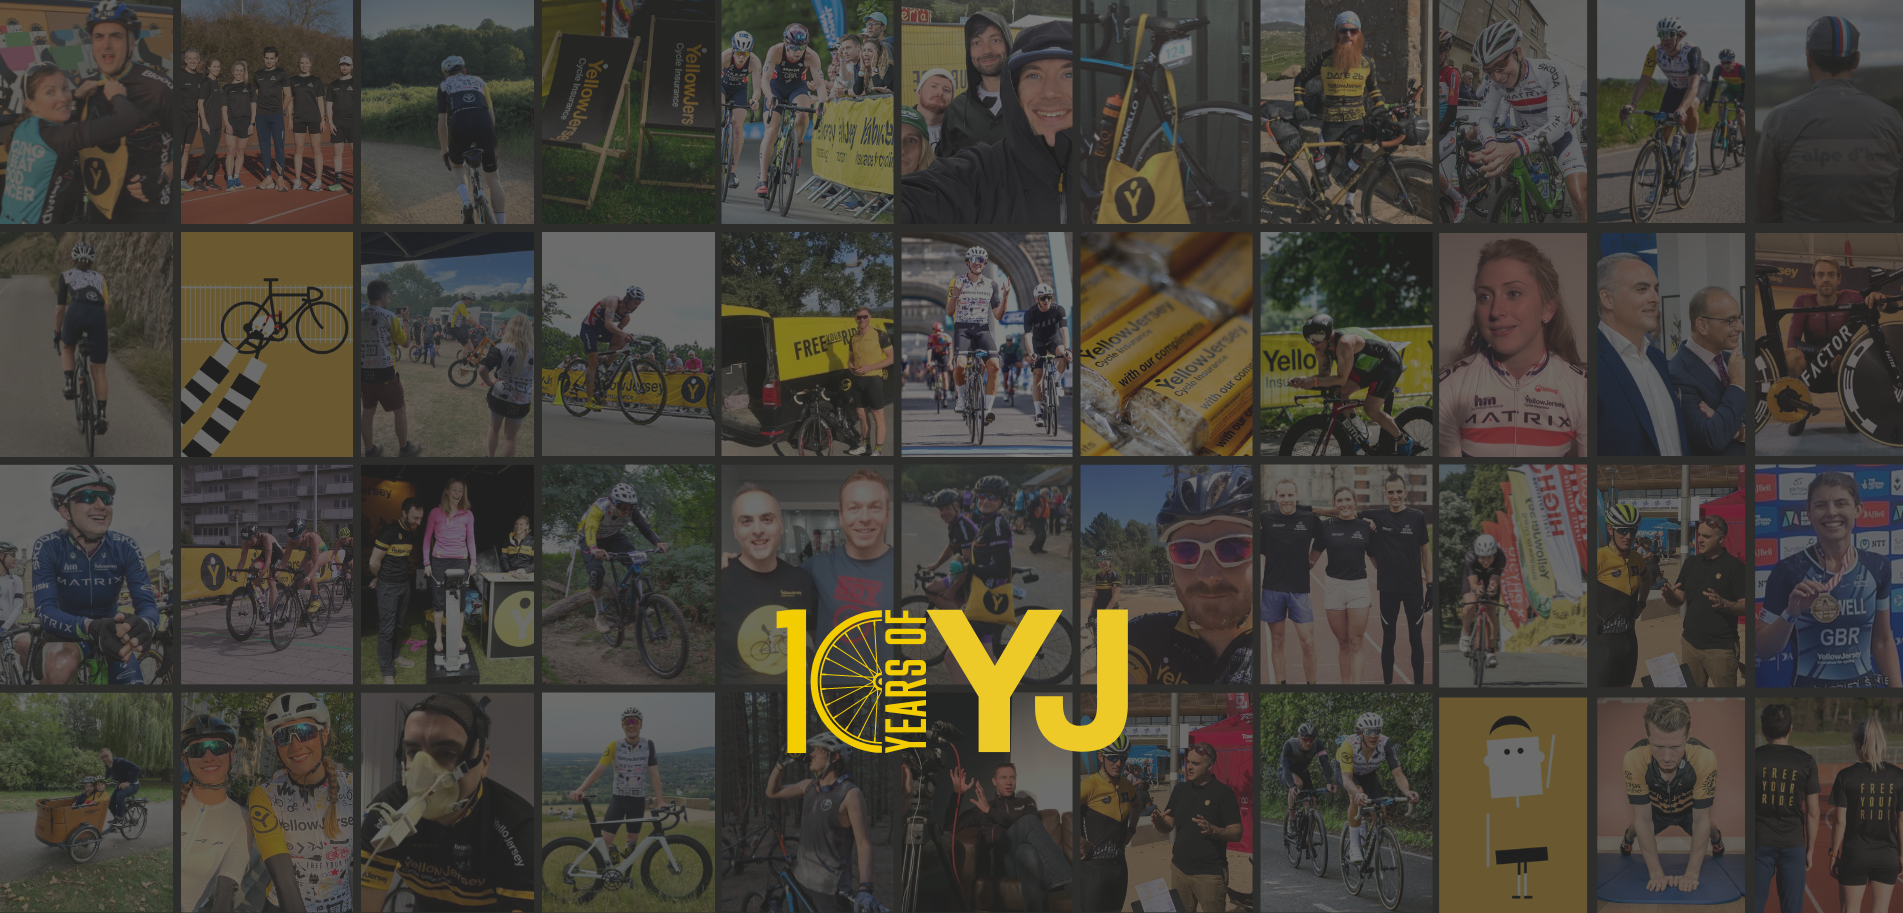 Bicycle insurance - 10 years of Yellow Jersey insurance. Photo collage shows dozens of pictures of the Yellow Jersey team attending 10 years of events, races, trade shows and similar. A special 